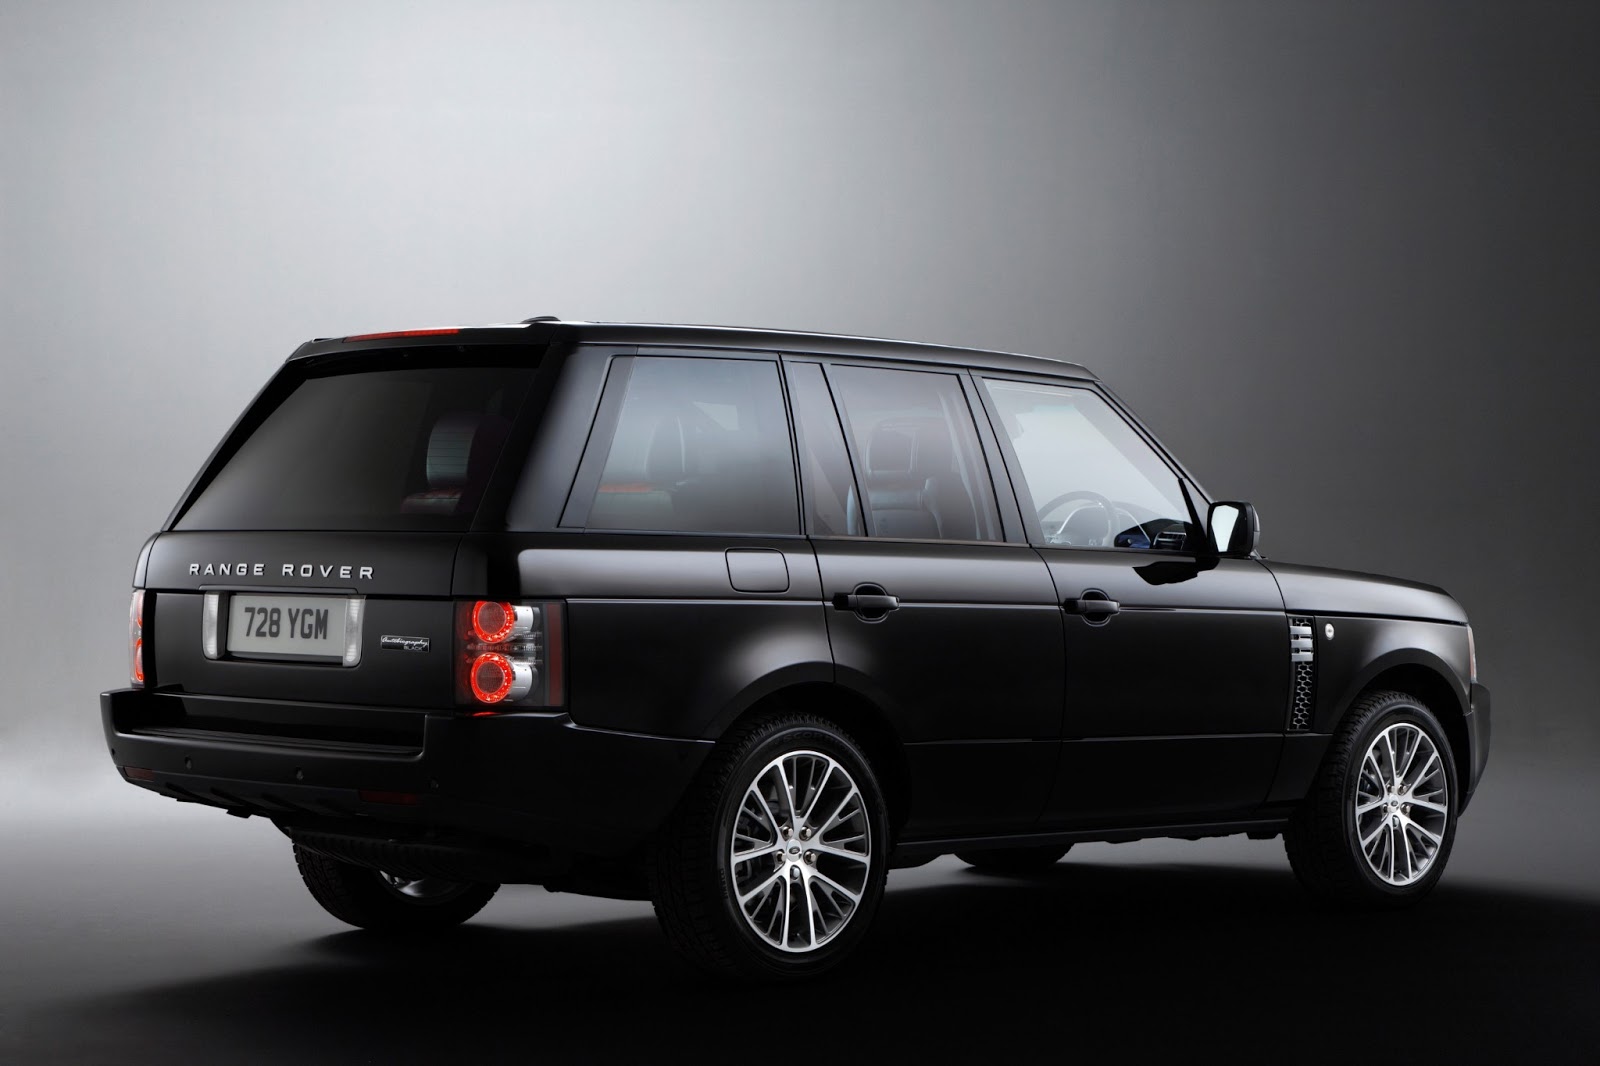 Cars GTO: 2011 Range Rover Autobiography Black 40th Anniversary Limited ...